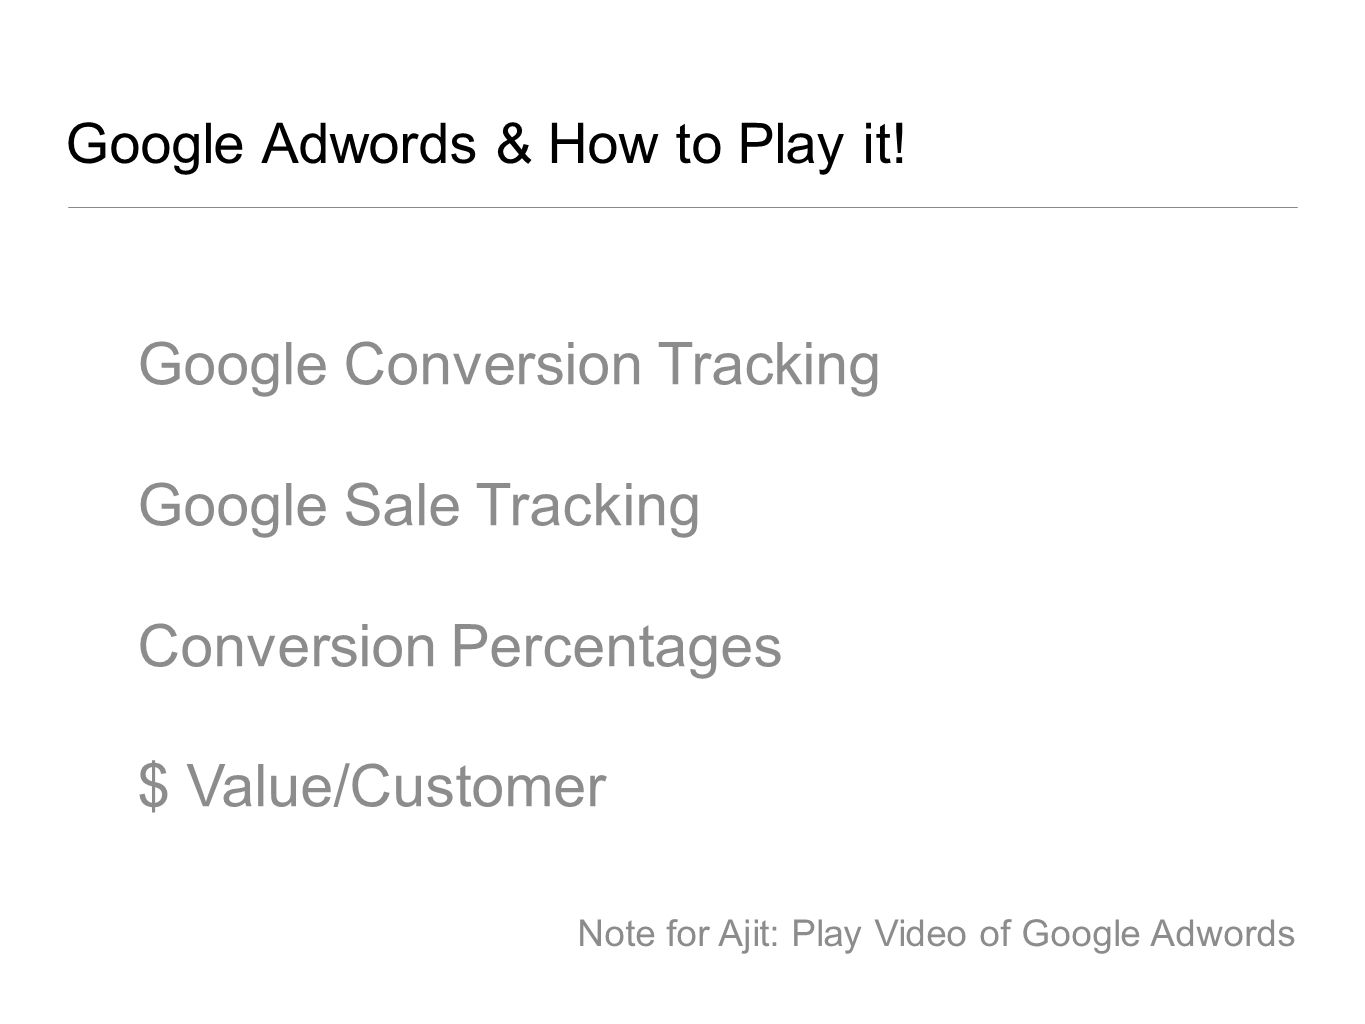 Google Adwords & How to Play it.